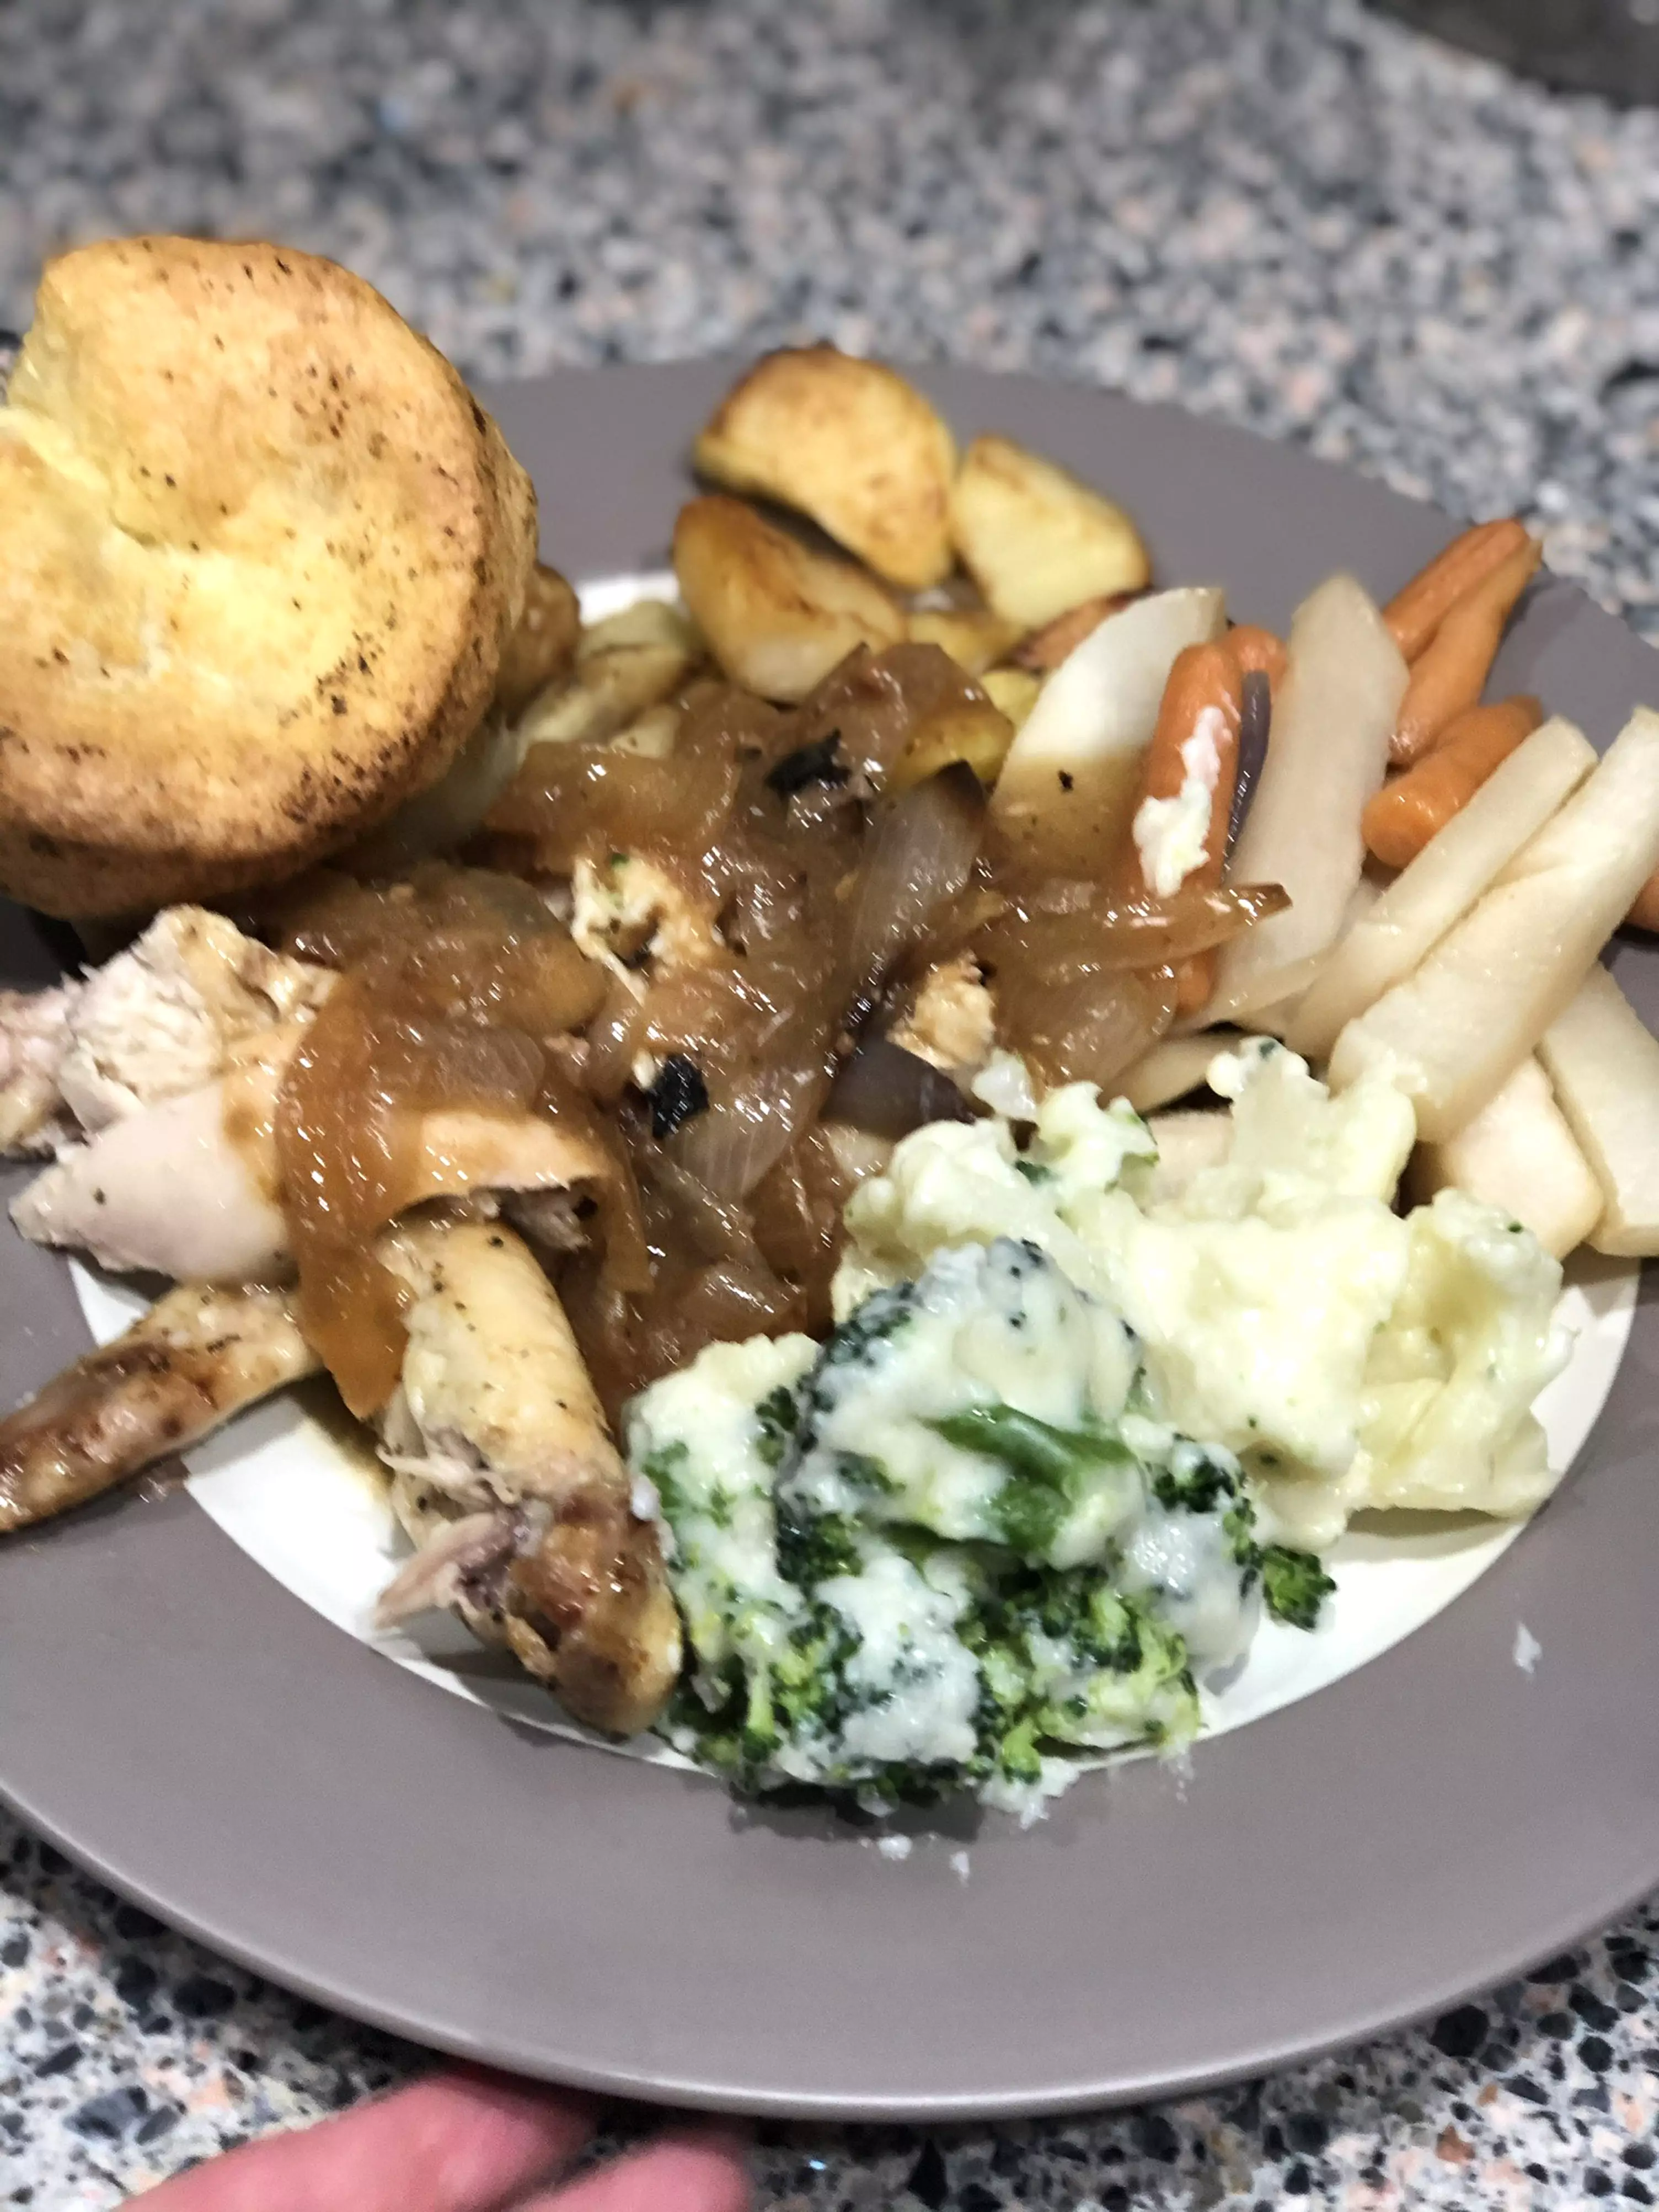 Megan was determined to make a classic British roast dinner (